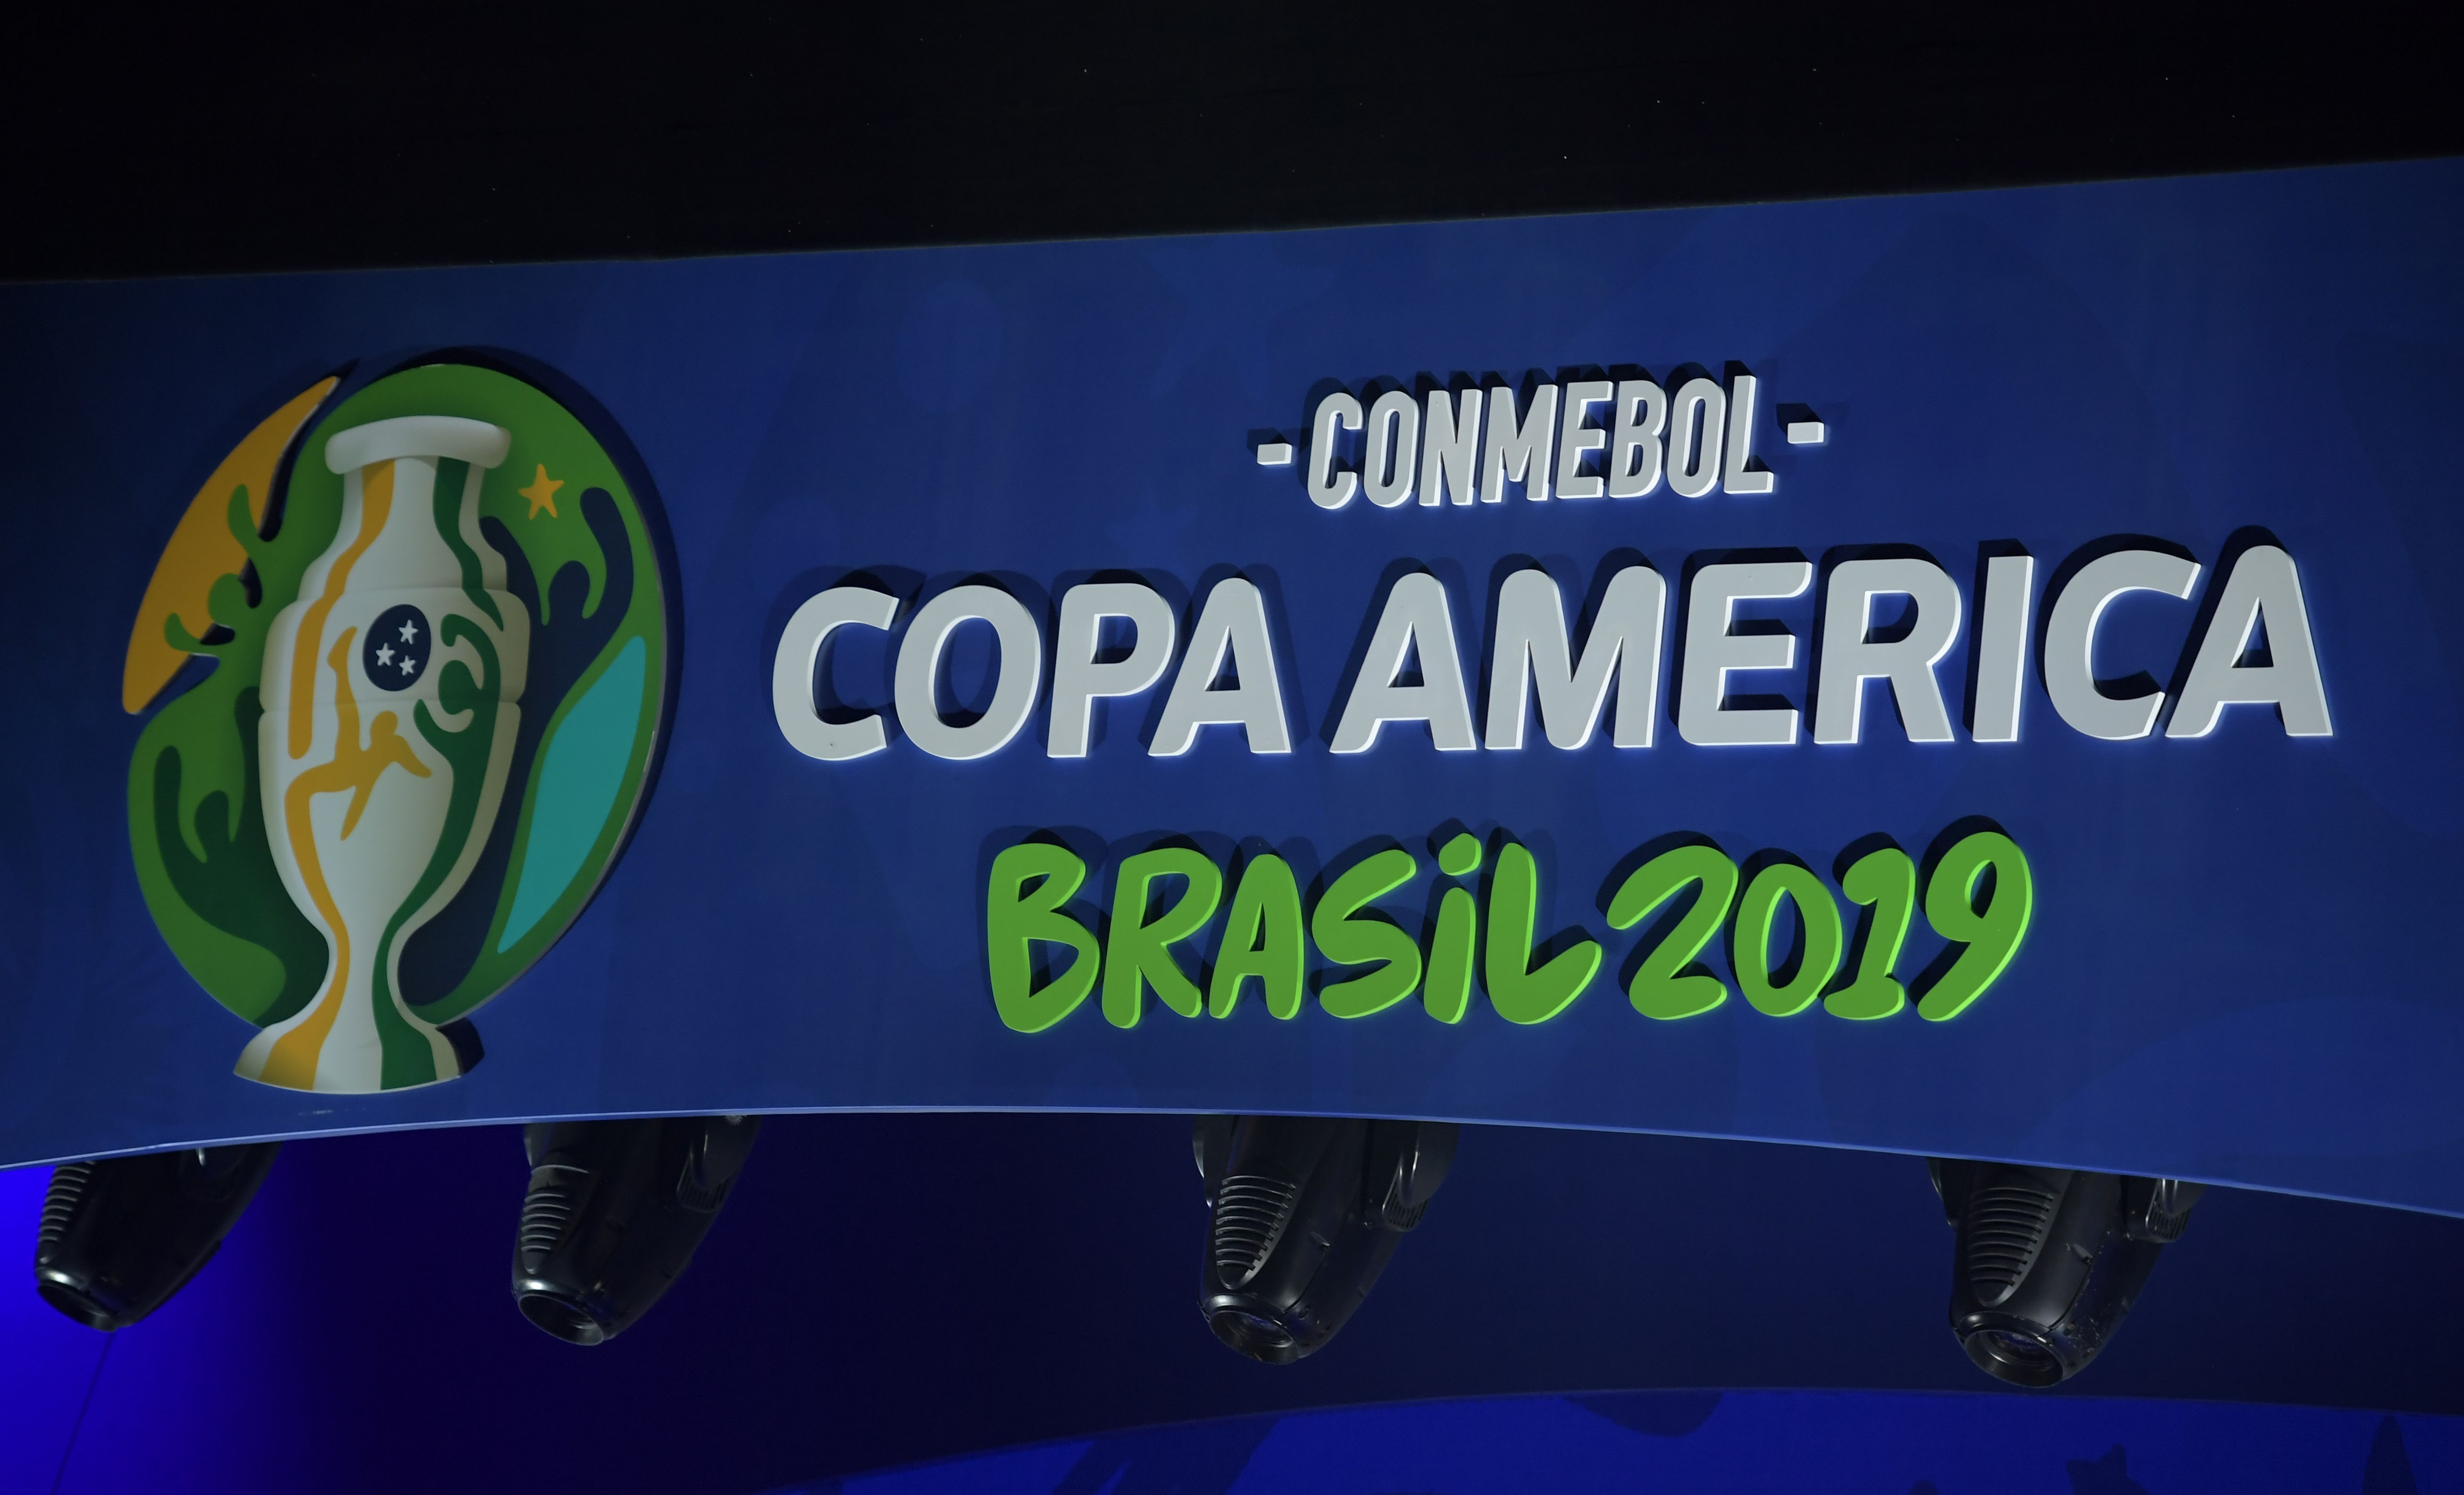 The logo of the 2019 Copa America is displayed during the draw of the football tournament in Rio de Janeiro, Brazil, on January 24, 2019. - The 2019 Copa America will be held in Brazil between June 14 and July 7. (Photo by Carl DE SOUZA / AFP)        (Photo credit should read CARL DE SOUZA/AFP/Getty Images)